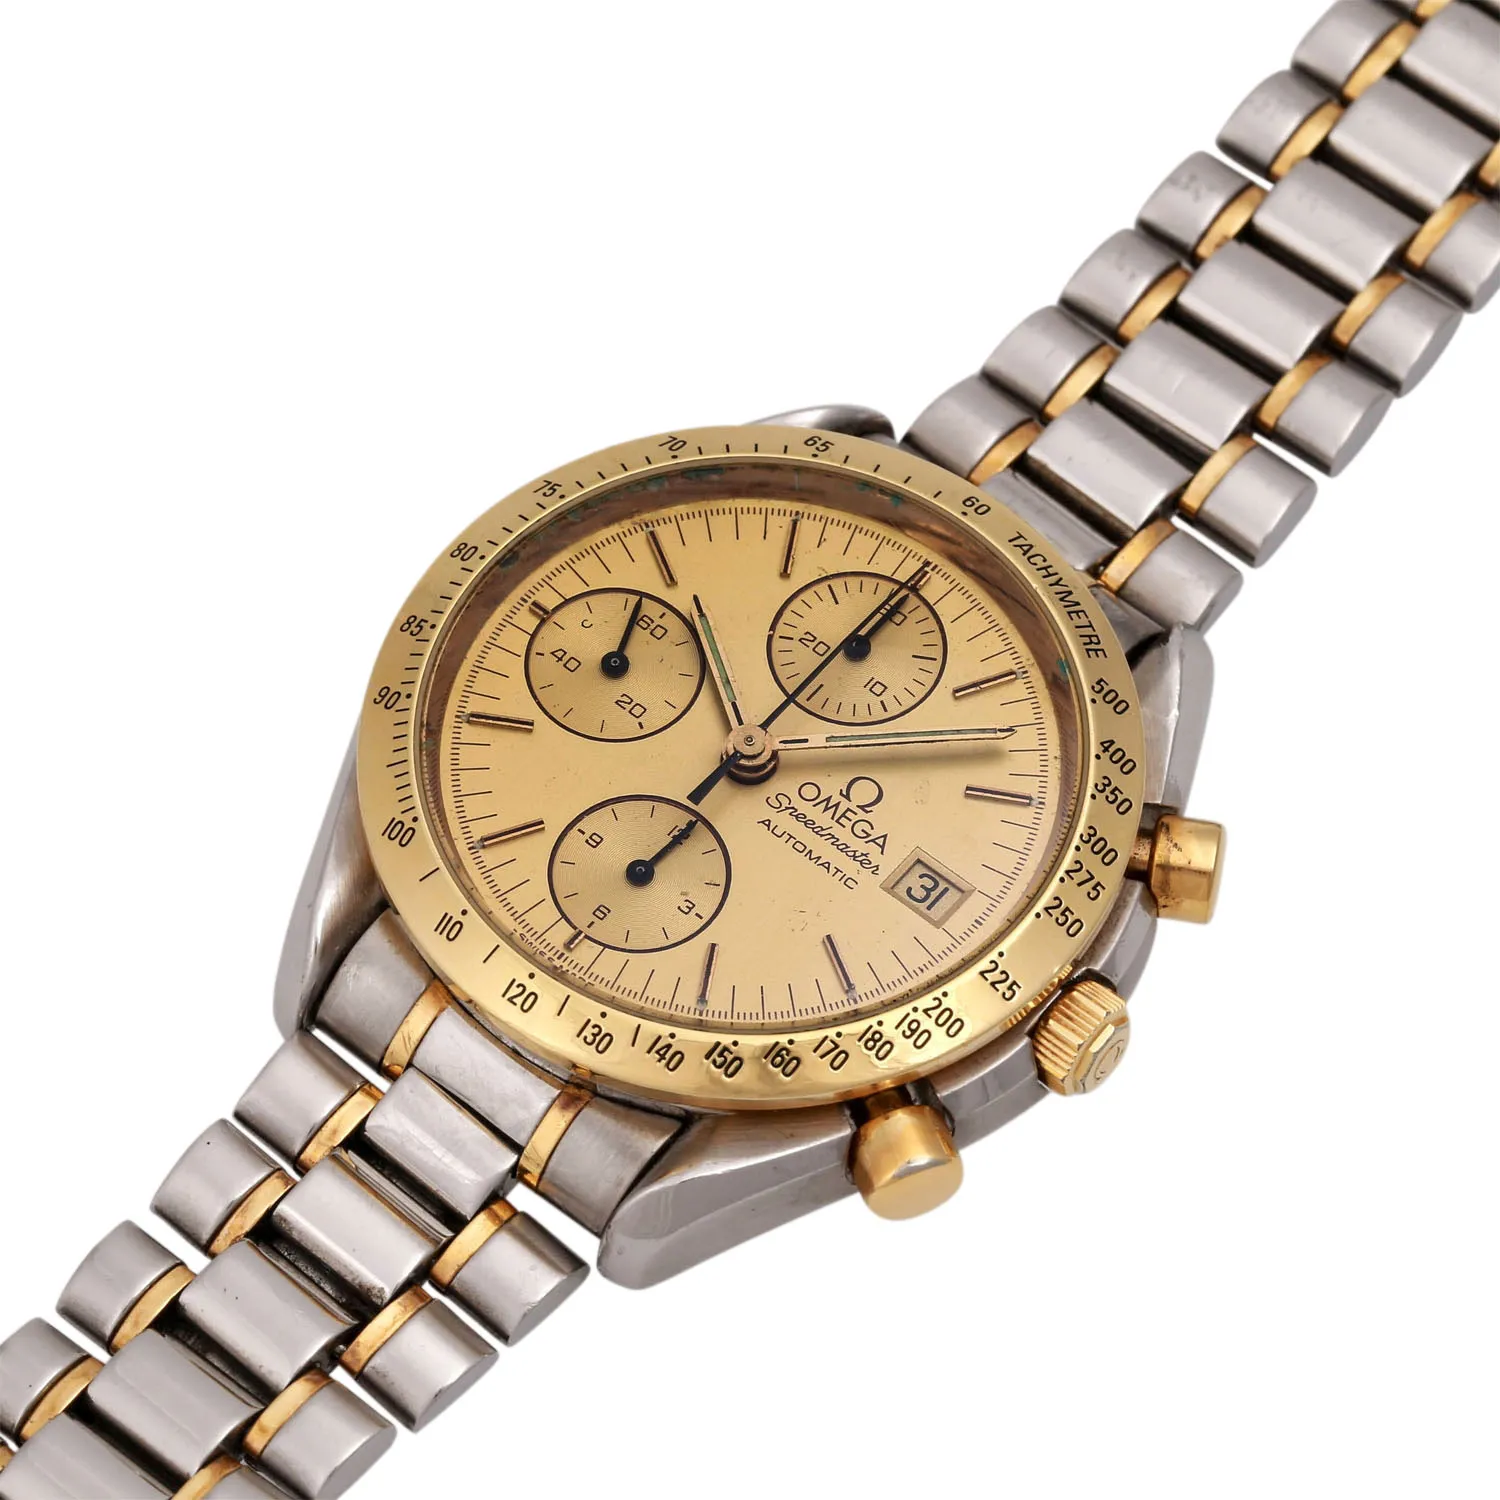 Omega Speedmaster Date 175.0043 37mm Yellow gold and stainless steel Champagne 3